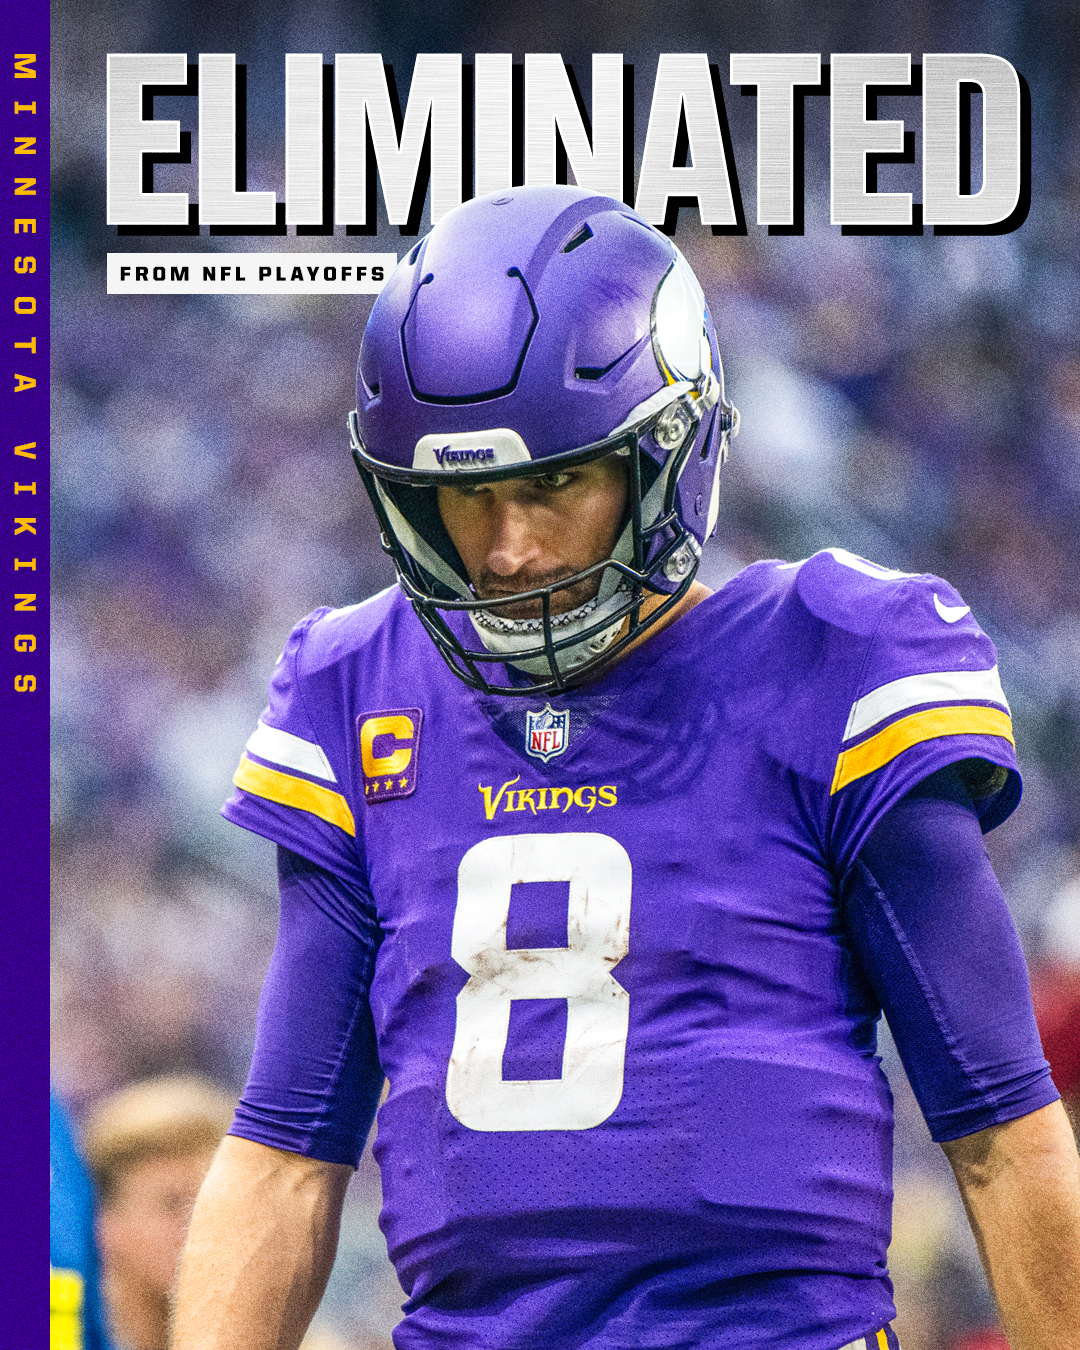 SportsCenter on X: 'The Vikings have been eliminated from the